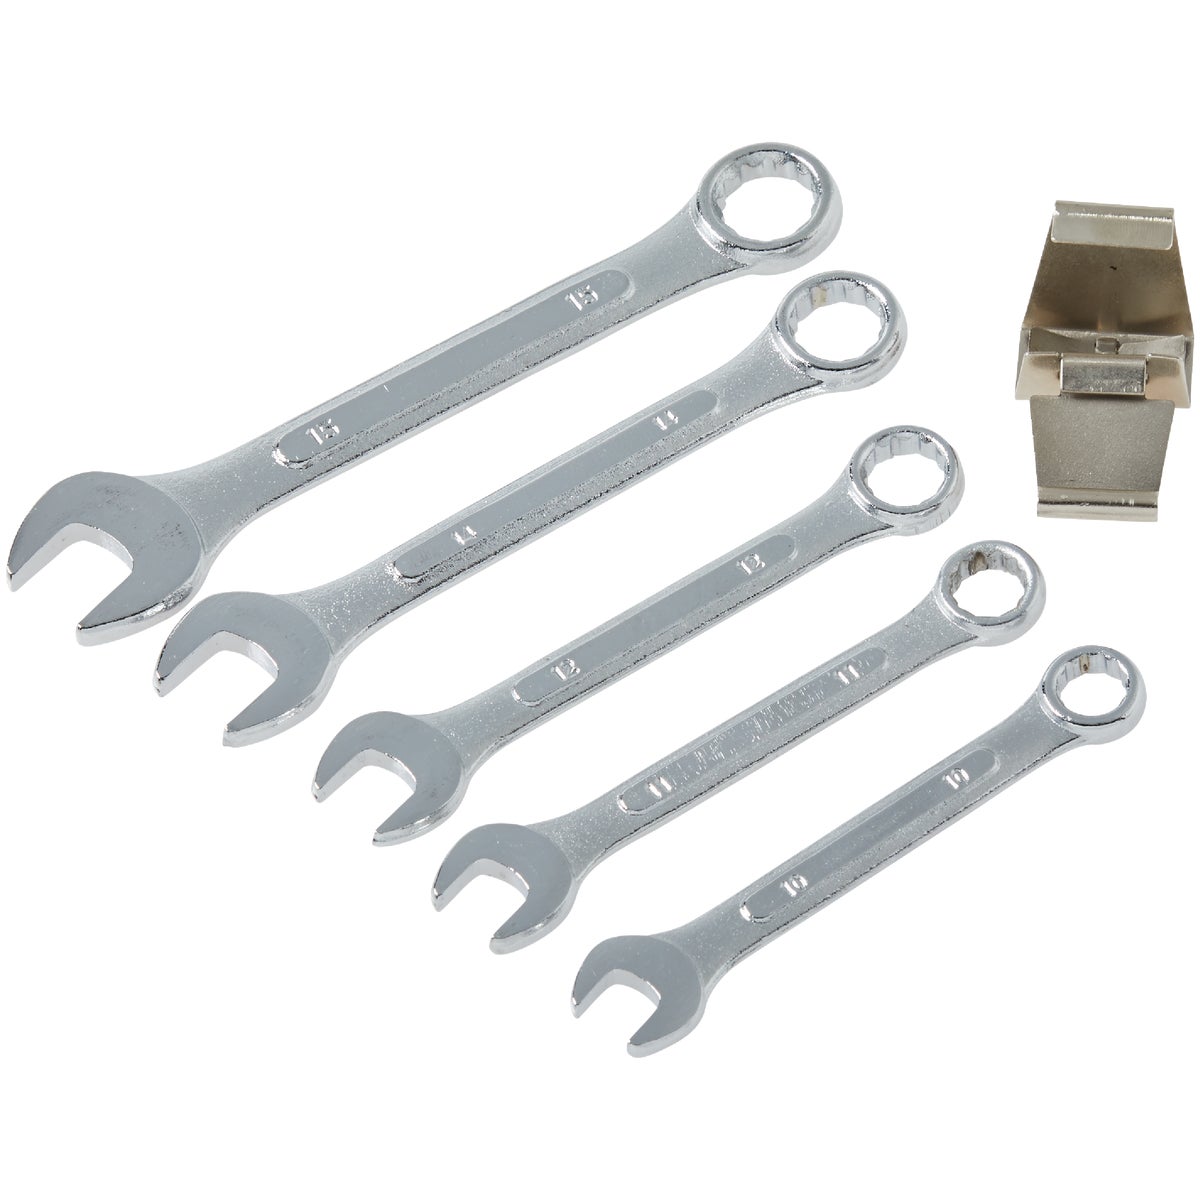 Do it Metric 12-Point Combination Wrench Set (5-Piece)